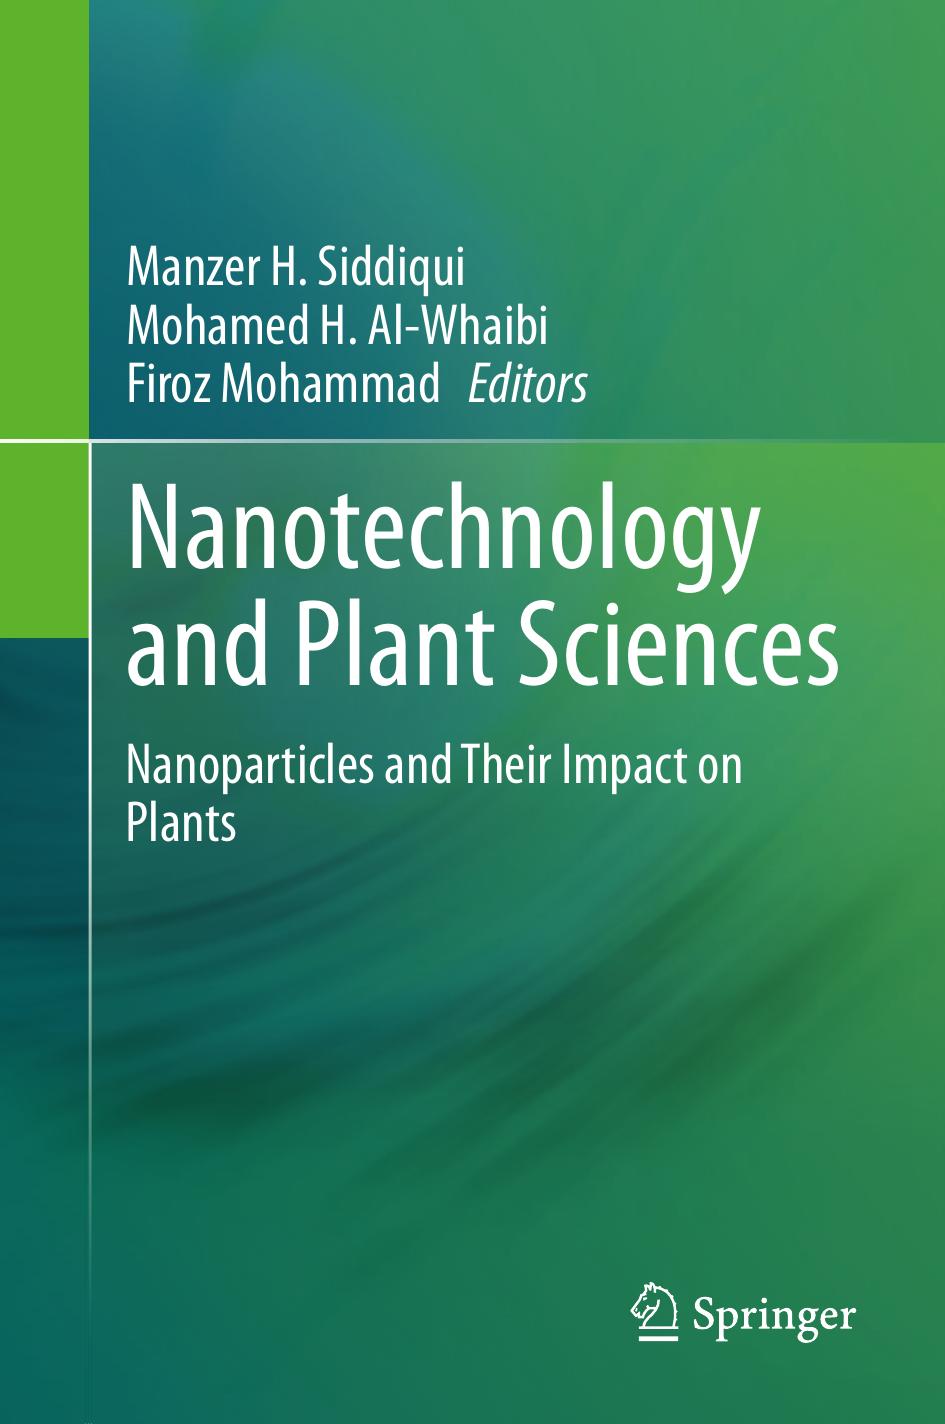 Nanotechnology and Plant Sciences Nanoparticles and Their Impact on Plants 2015